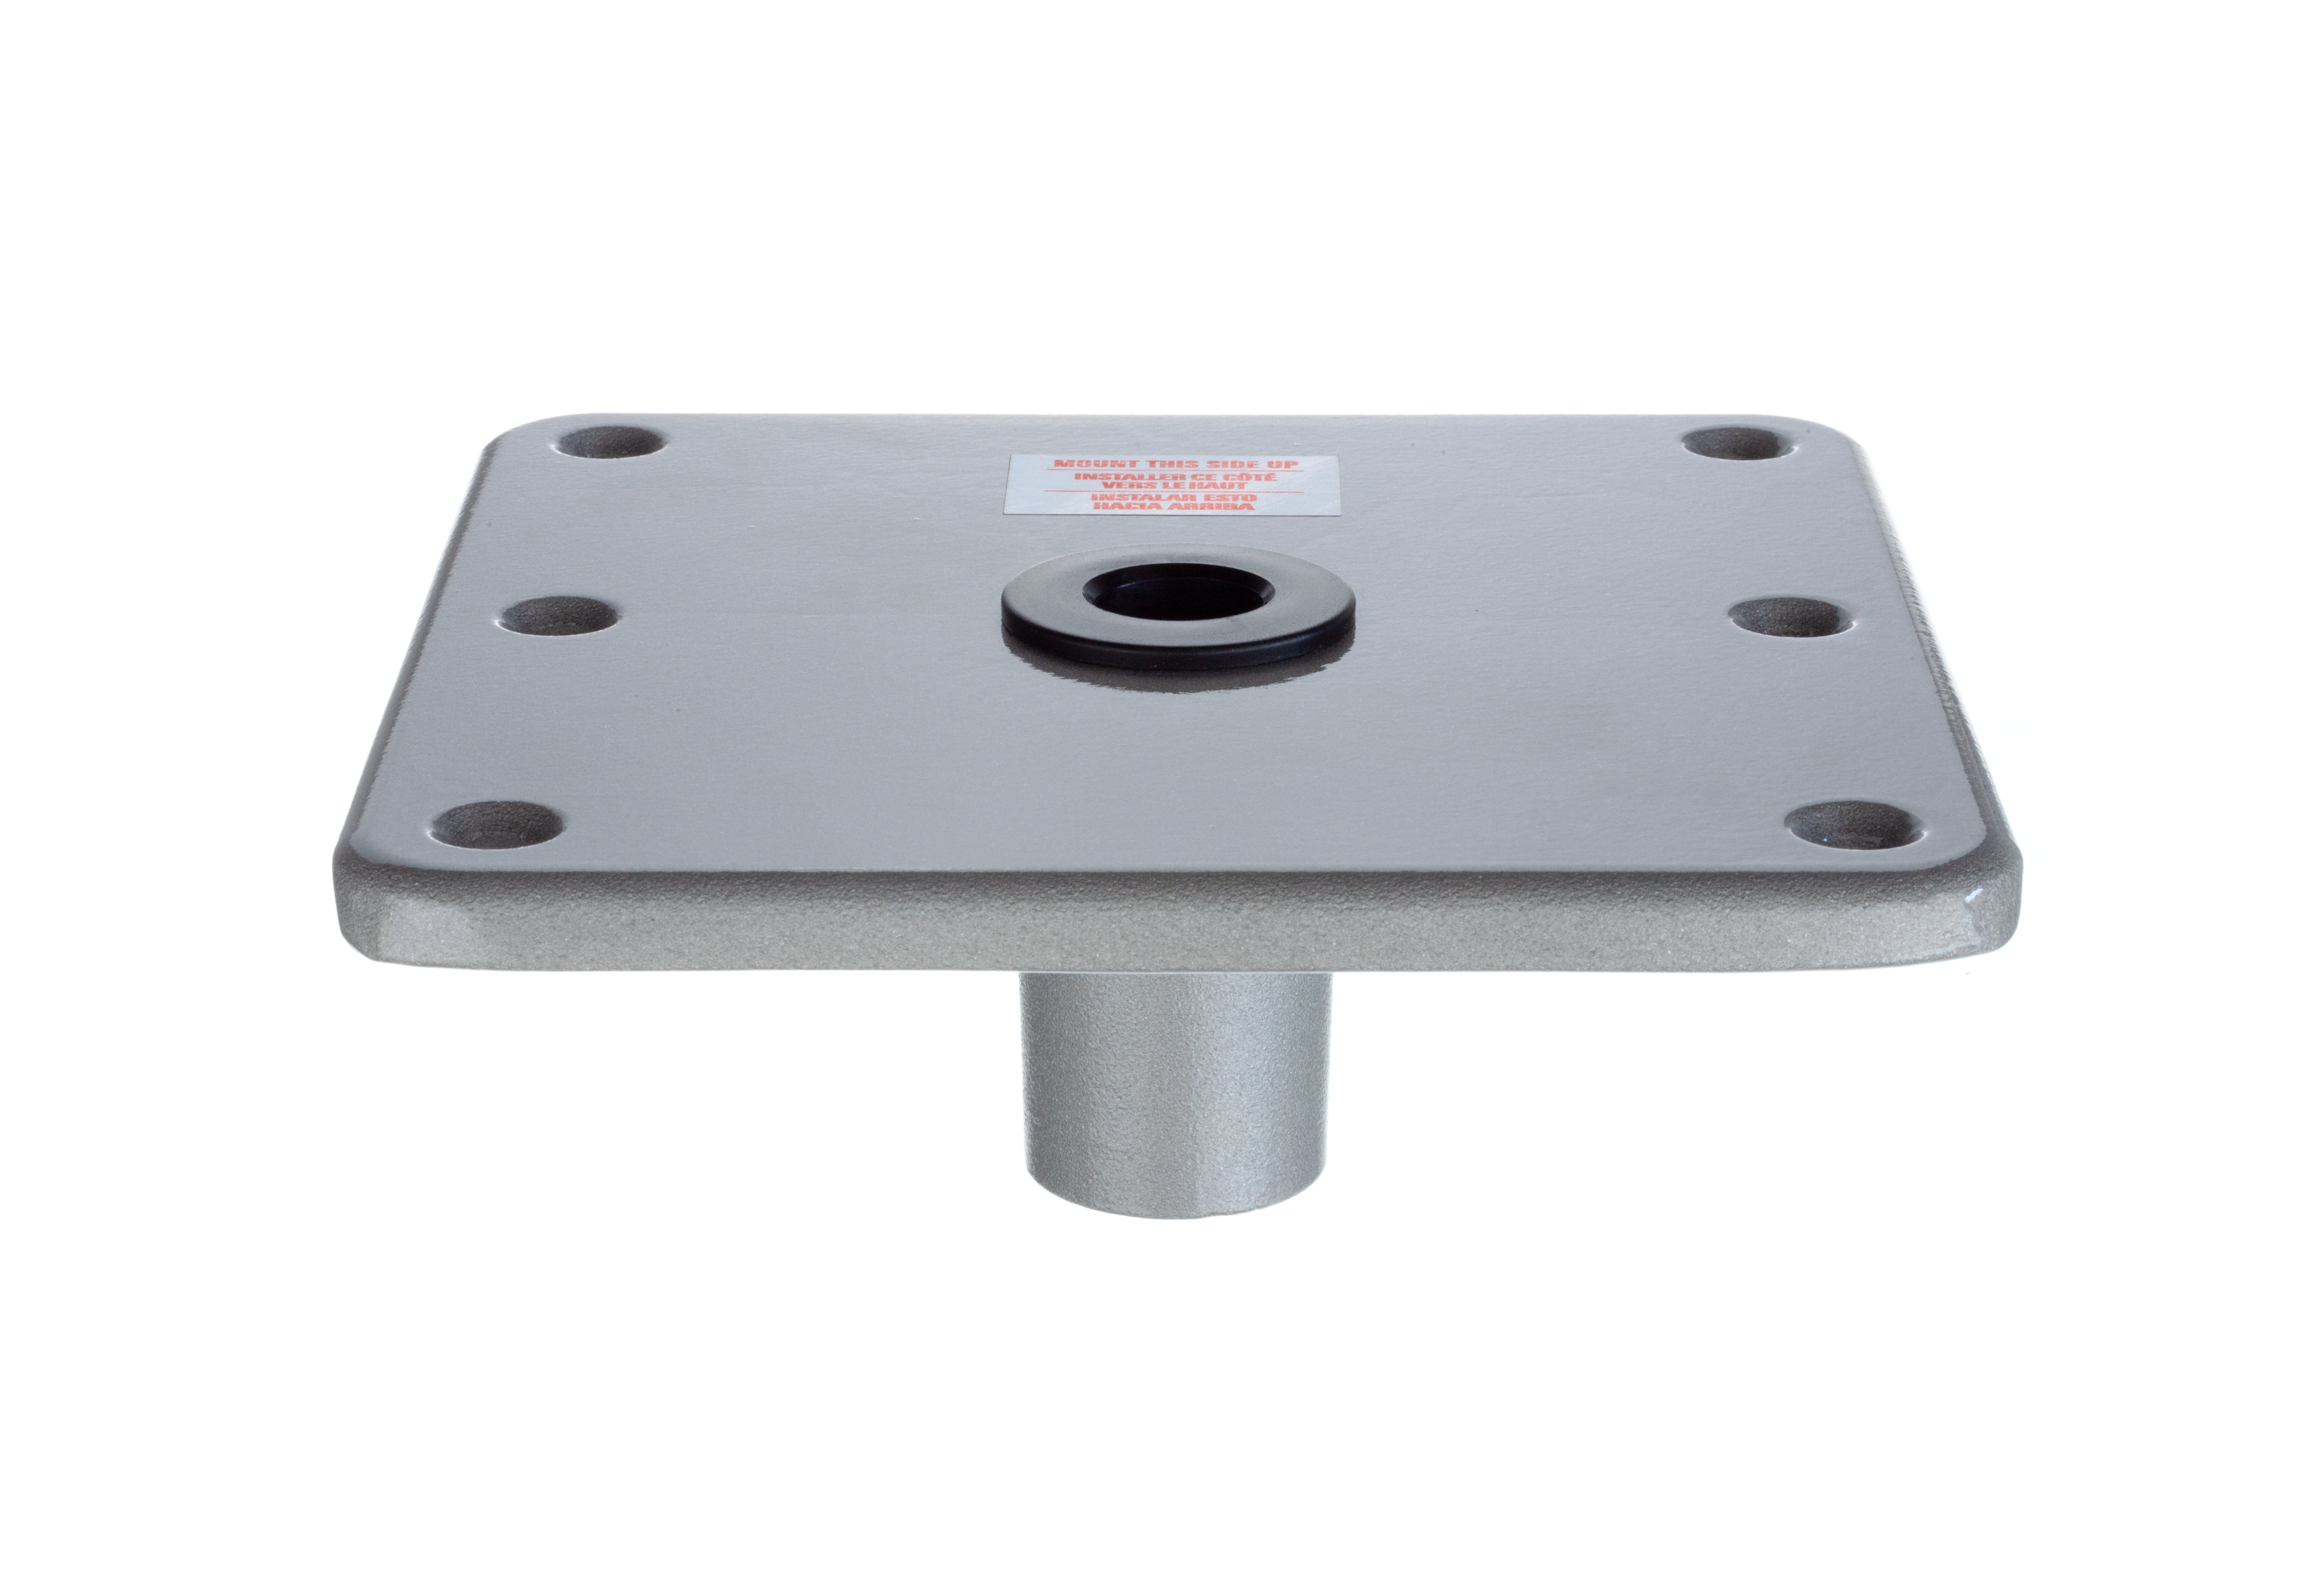 Kimpex Seat Mount Pedestal Kit 11in Post Aluminum Stainless Steel 7 x 7in Base